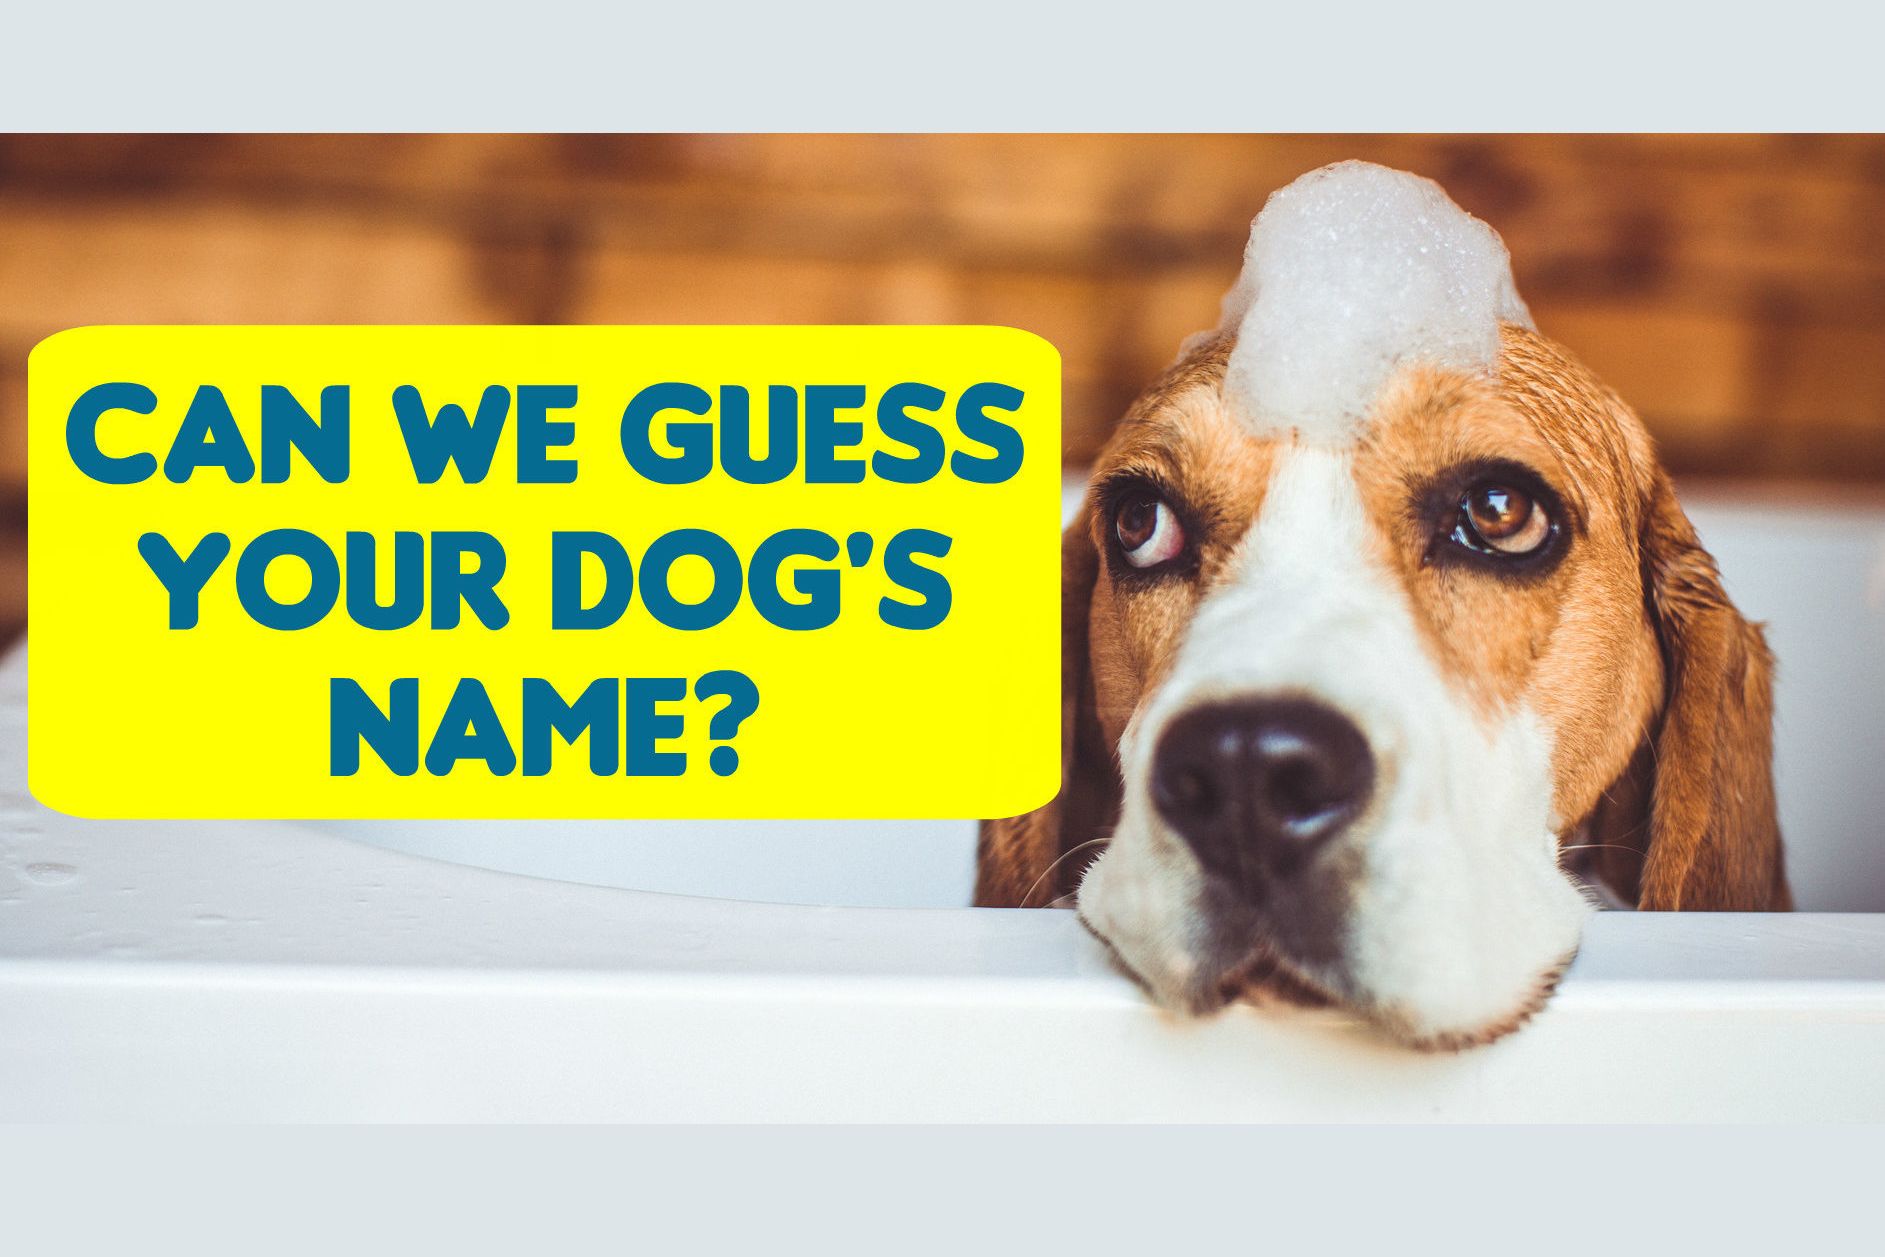 We Your Dog's Name In 12 Questions?